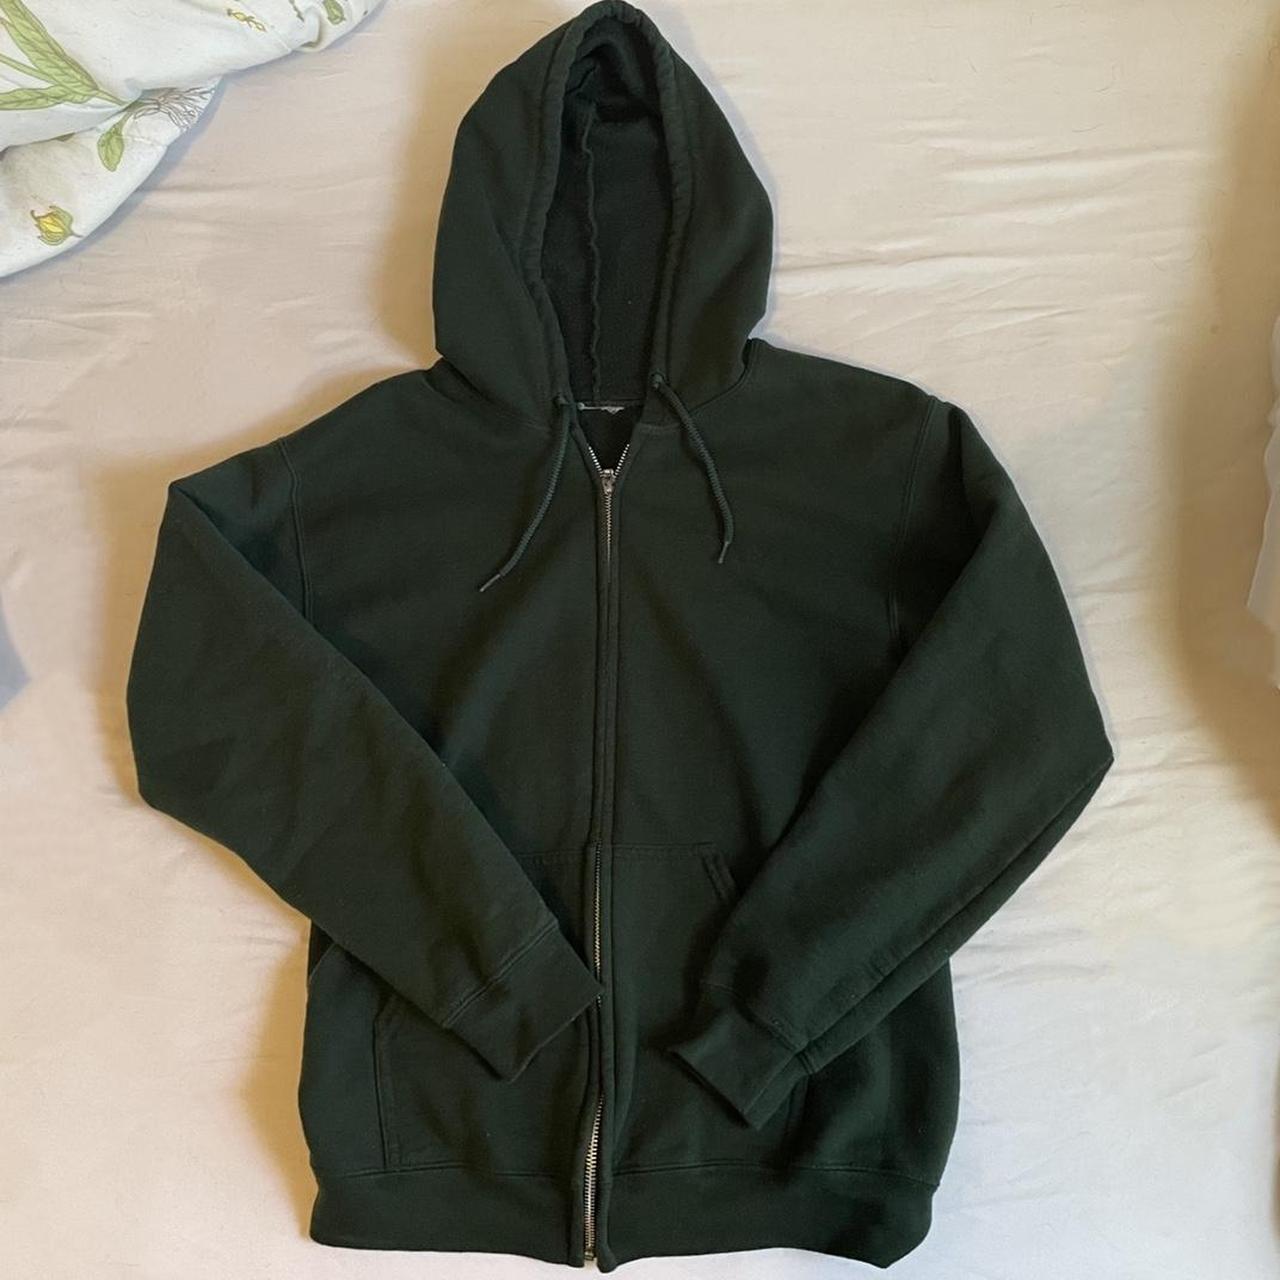 Cute and comfy forest green zip up jacket with... - Depop